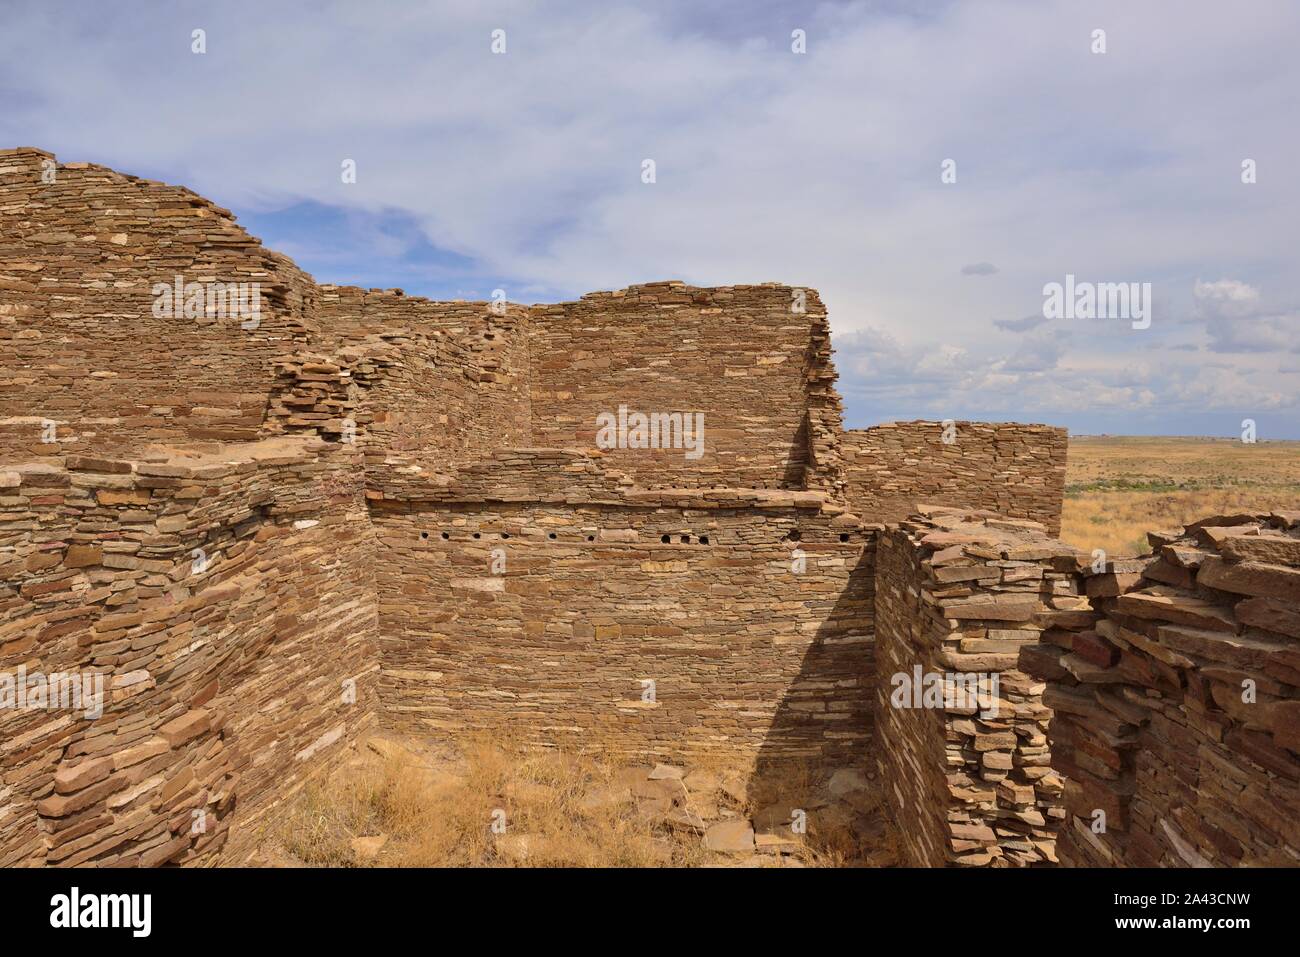 Inside Room block, Pueblo Pintado (900-1250s), 3 to 4-story Great House, Chaco Canyon, NM 190914 61467 Stock Photo